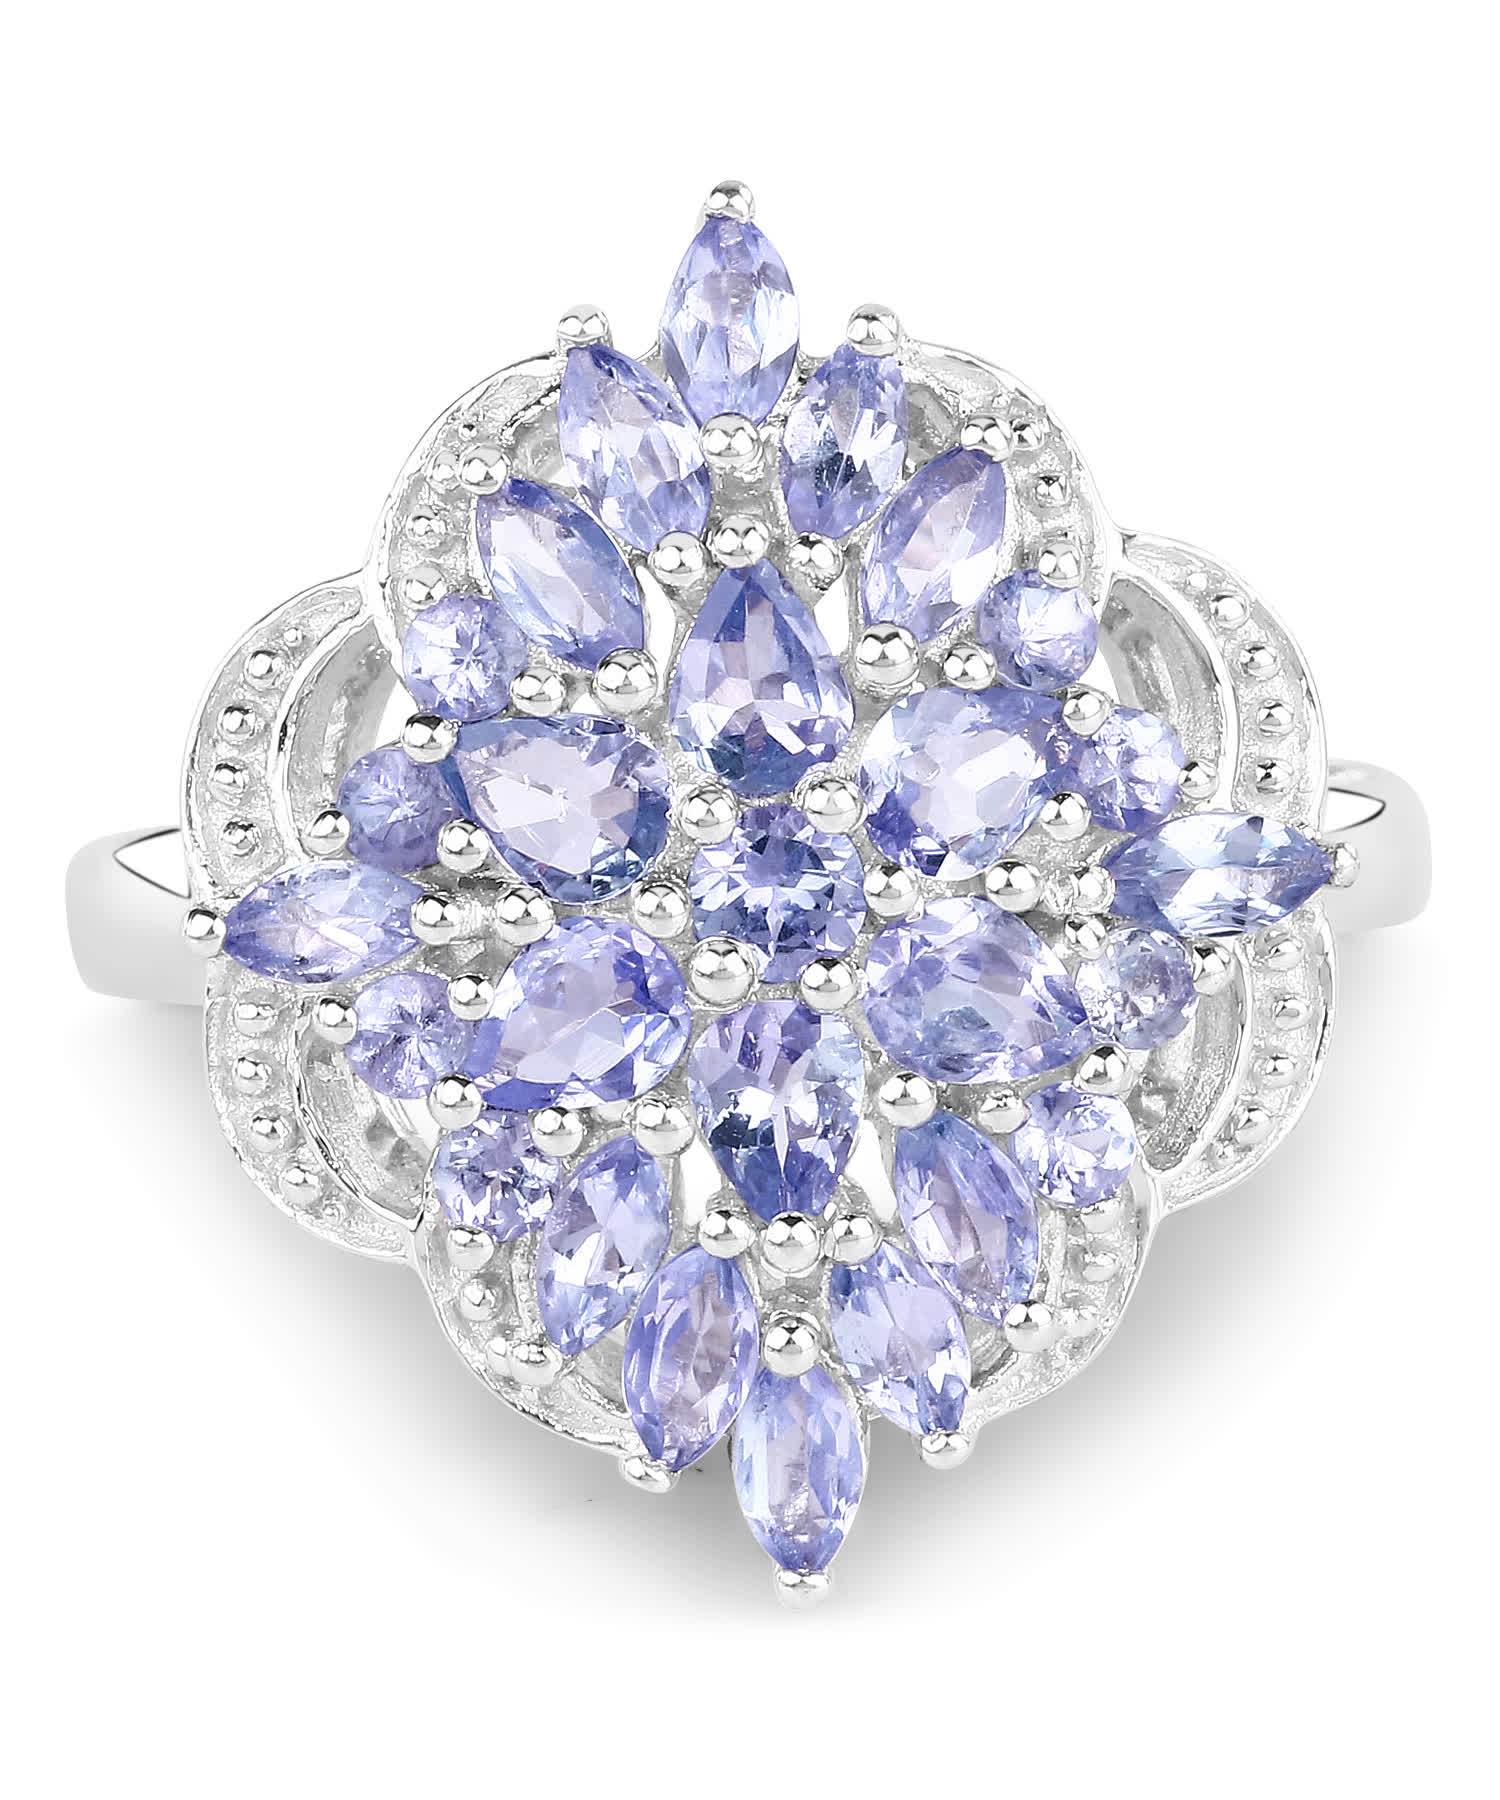 2.18ctw Natural Tanzanite Rhodium Plated 925 Sterling Silver Flower Cocktail Ring View 3